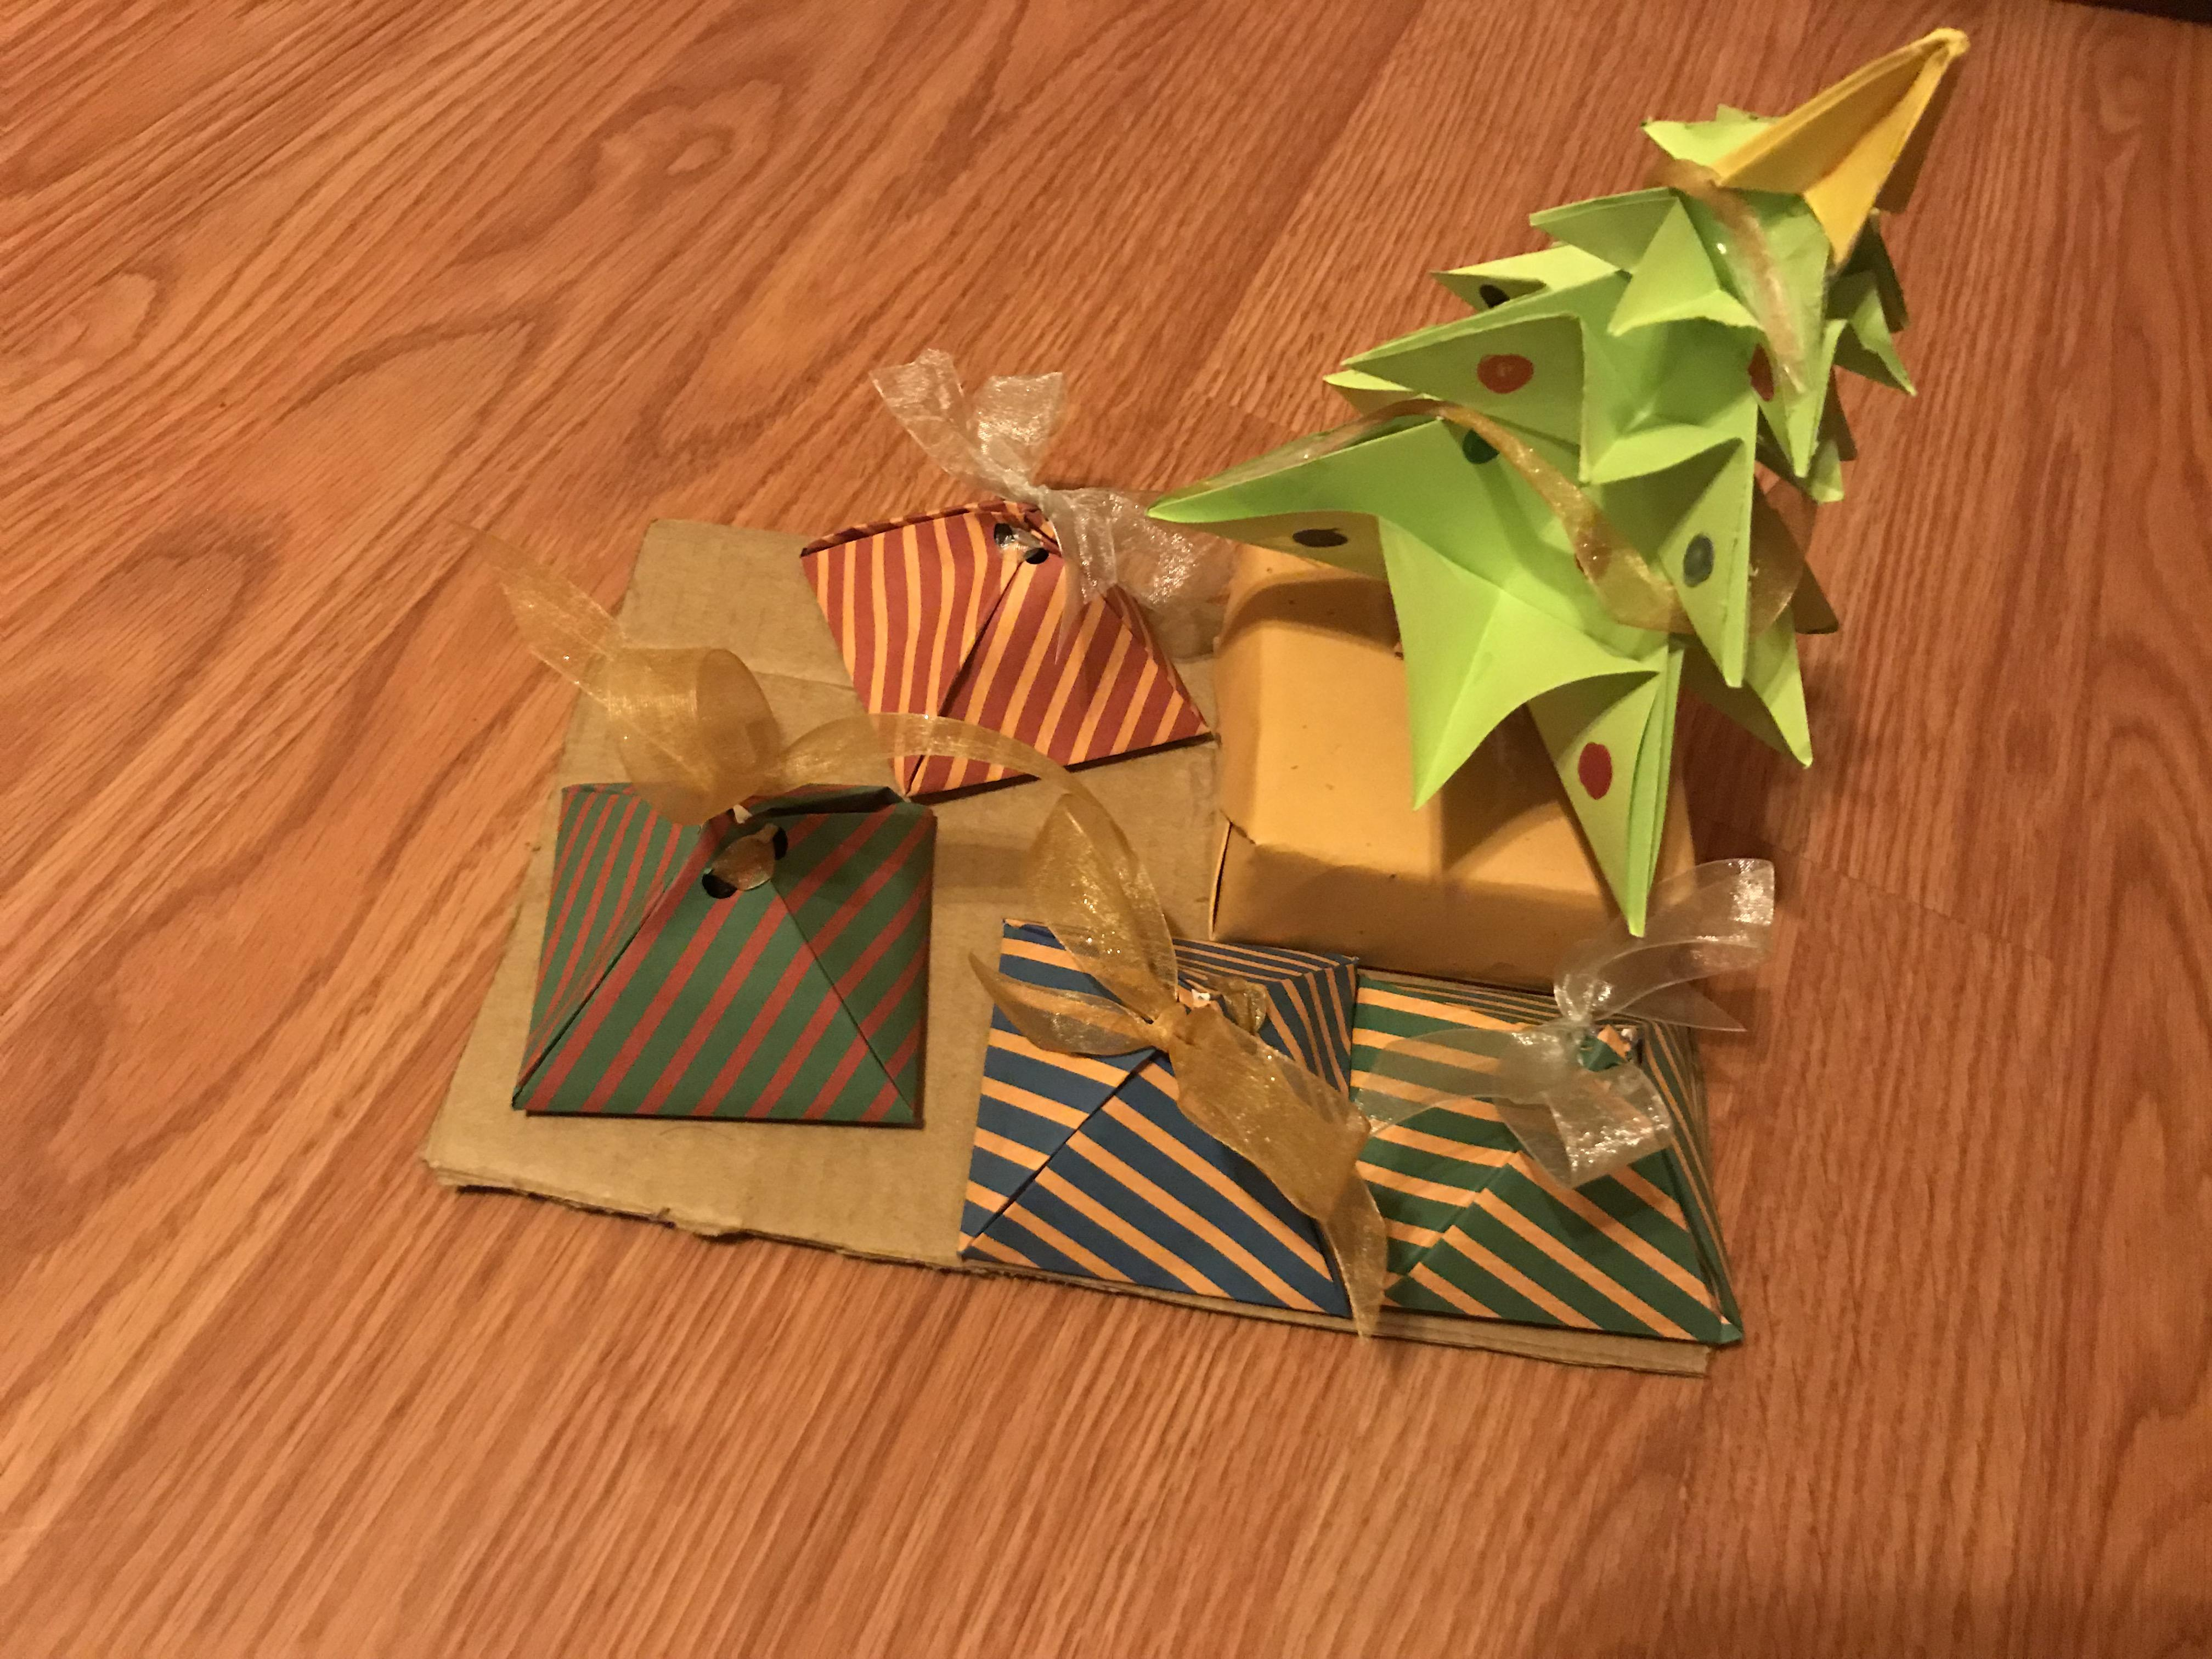 Gift Wrapping Origami Origami Christmas Gift Wrapping For My Fianc Presents Under The